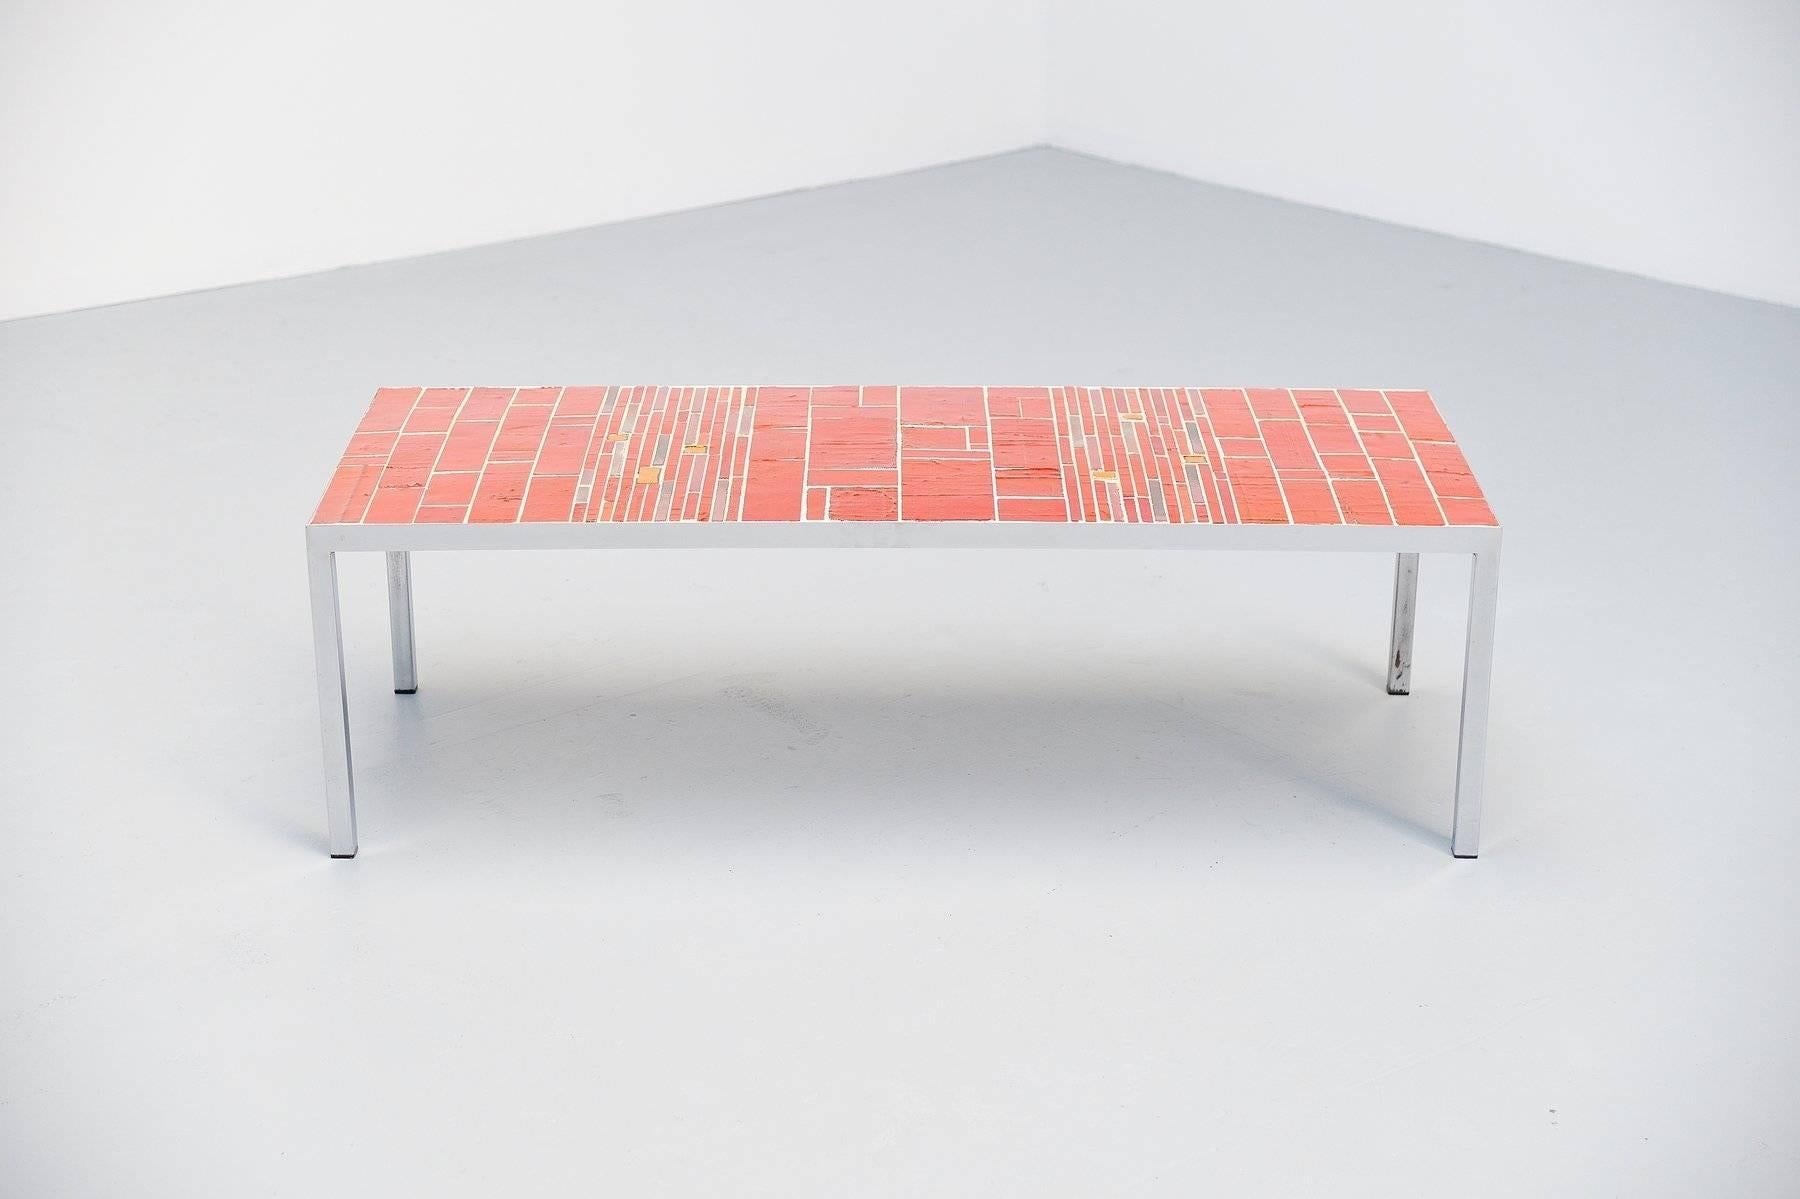 Very nice unique coffee table designed by Rogier Vandeweghe produced in the atelier of Amphora, Belgium, circa 1960. This table has a chrome plated metal frame and the top has a red ceramic tiles inlay. The table looks like a work of art that is